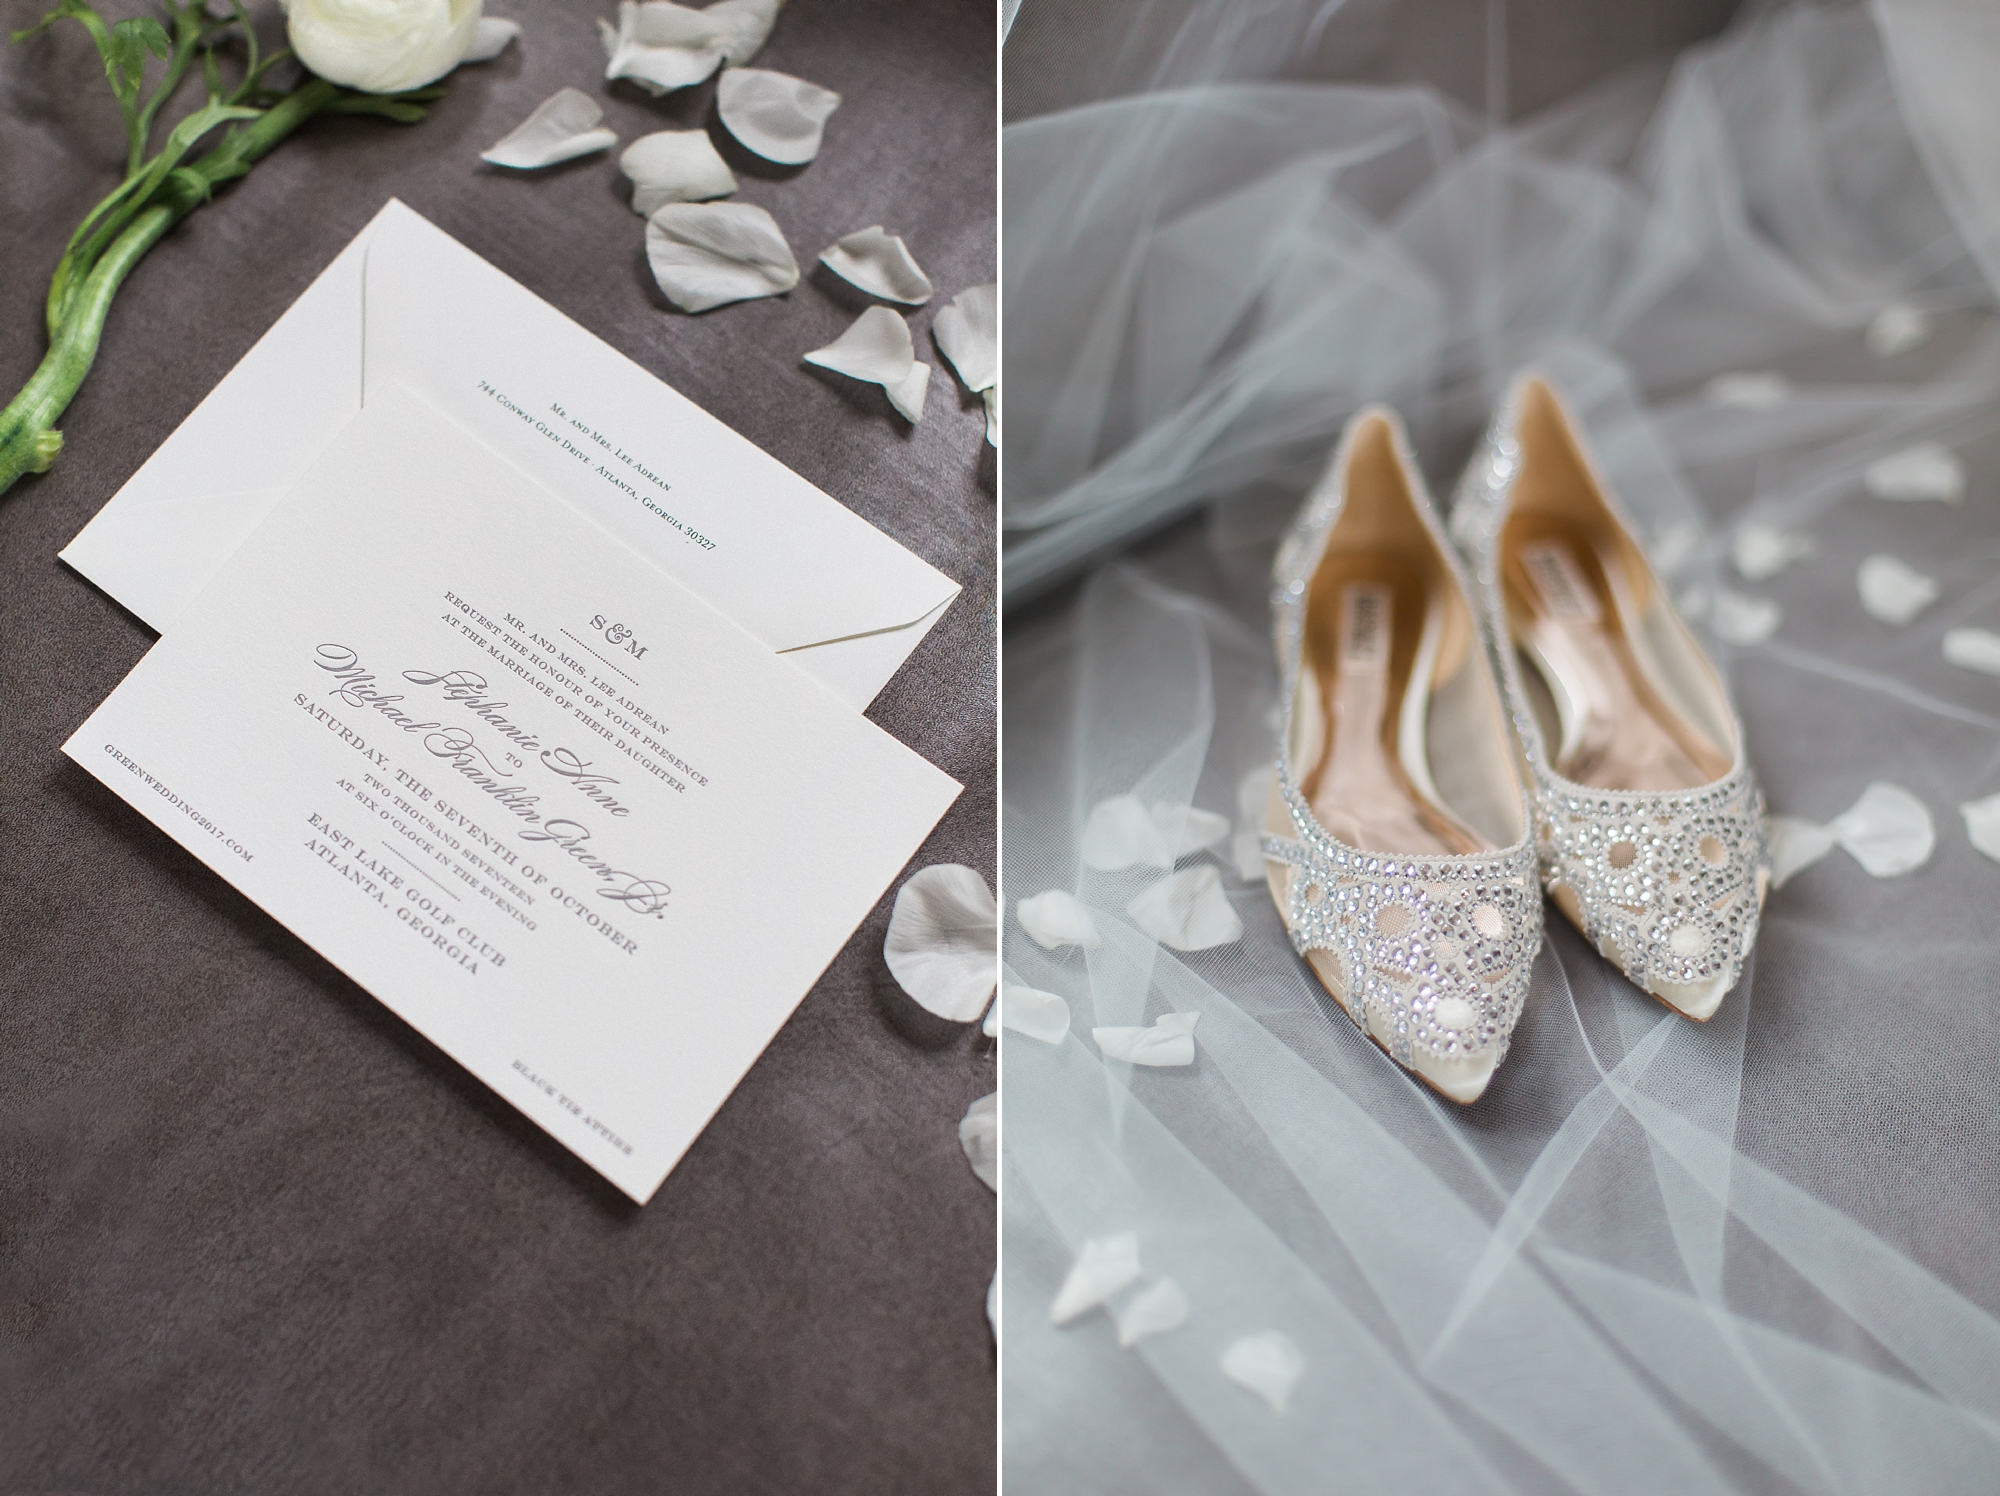 Wedding Shoes and Wedding Invitation Suite by Top Wedding Photographers Leigh and Becca at East Lake Golf Club